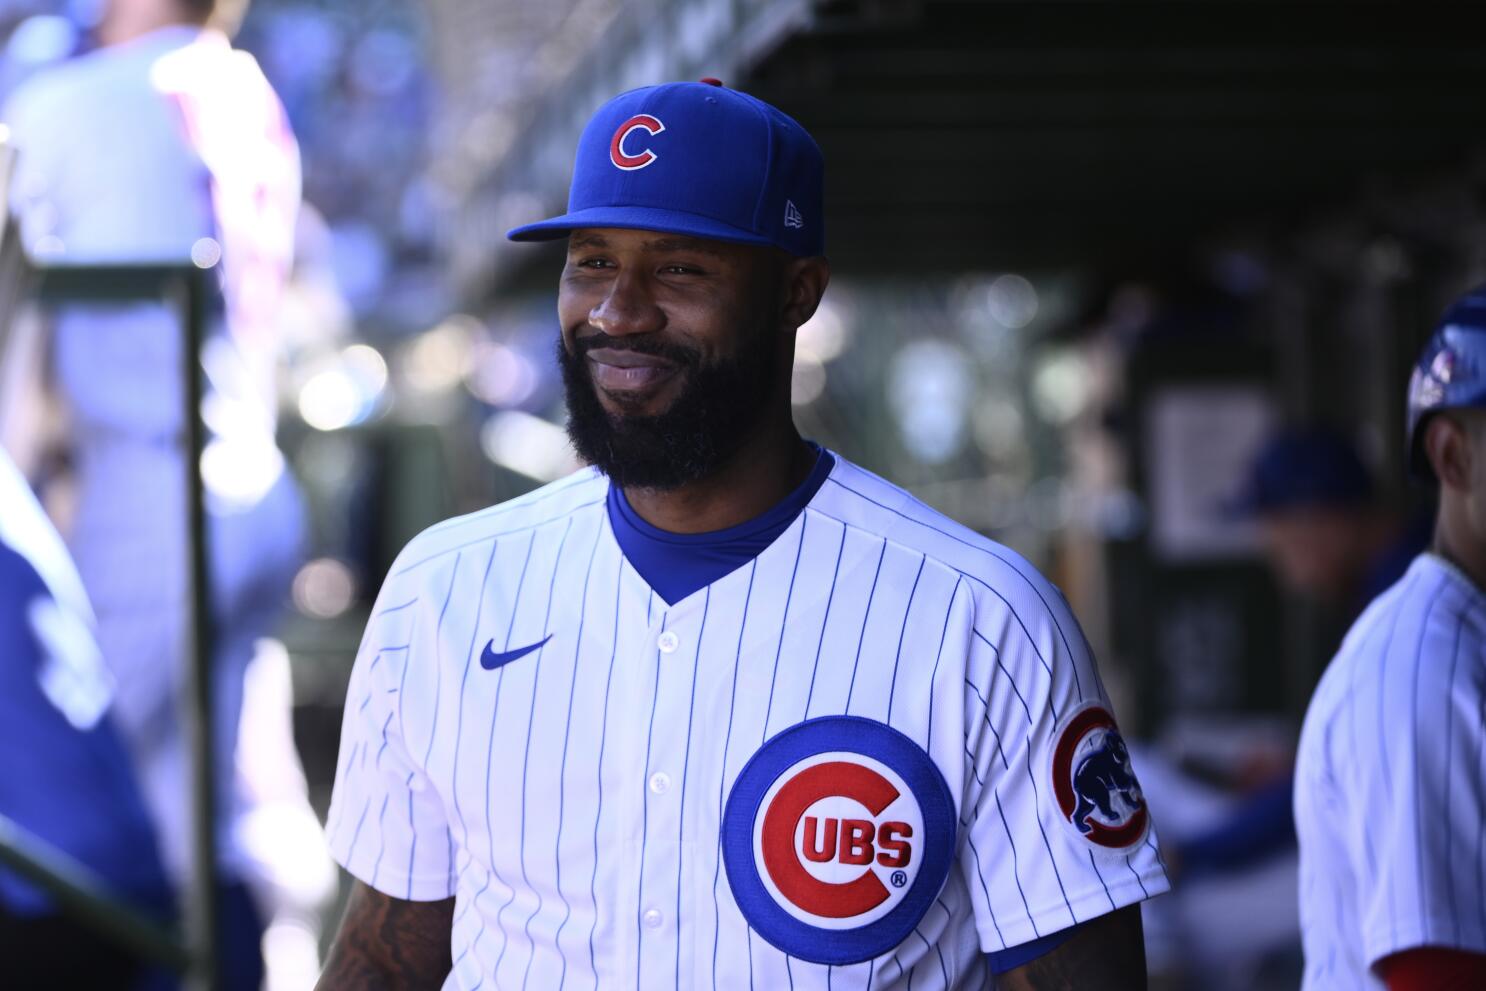 Chicago Cubs - We are honored to recognize Jason Heyward